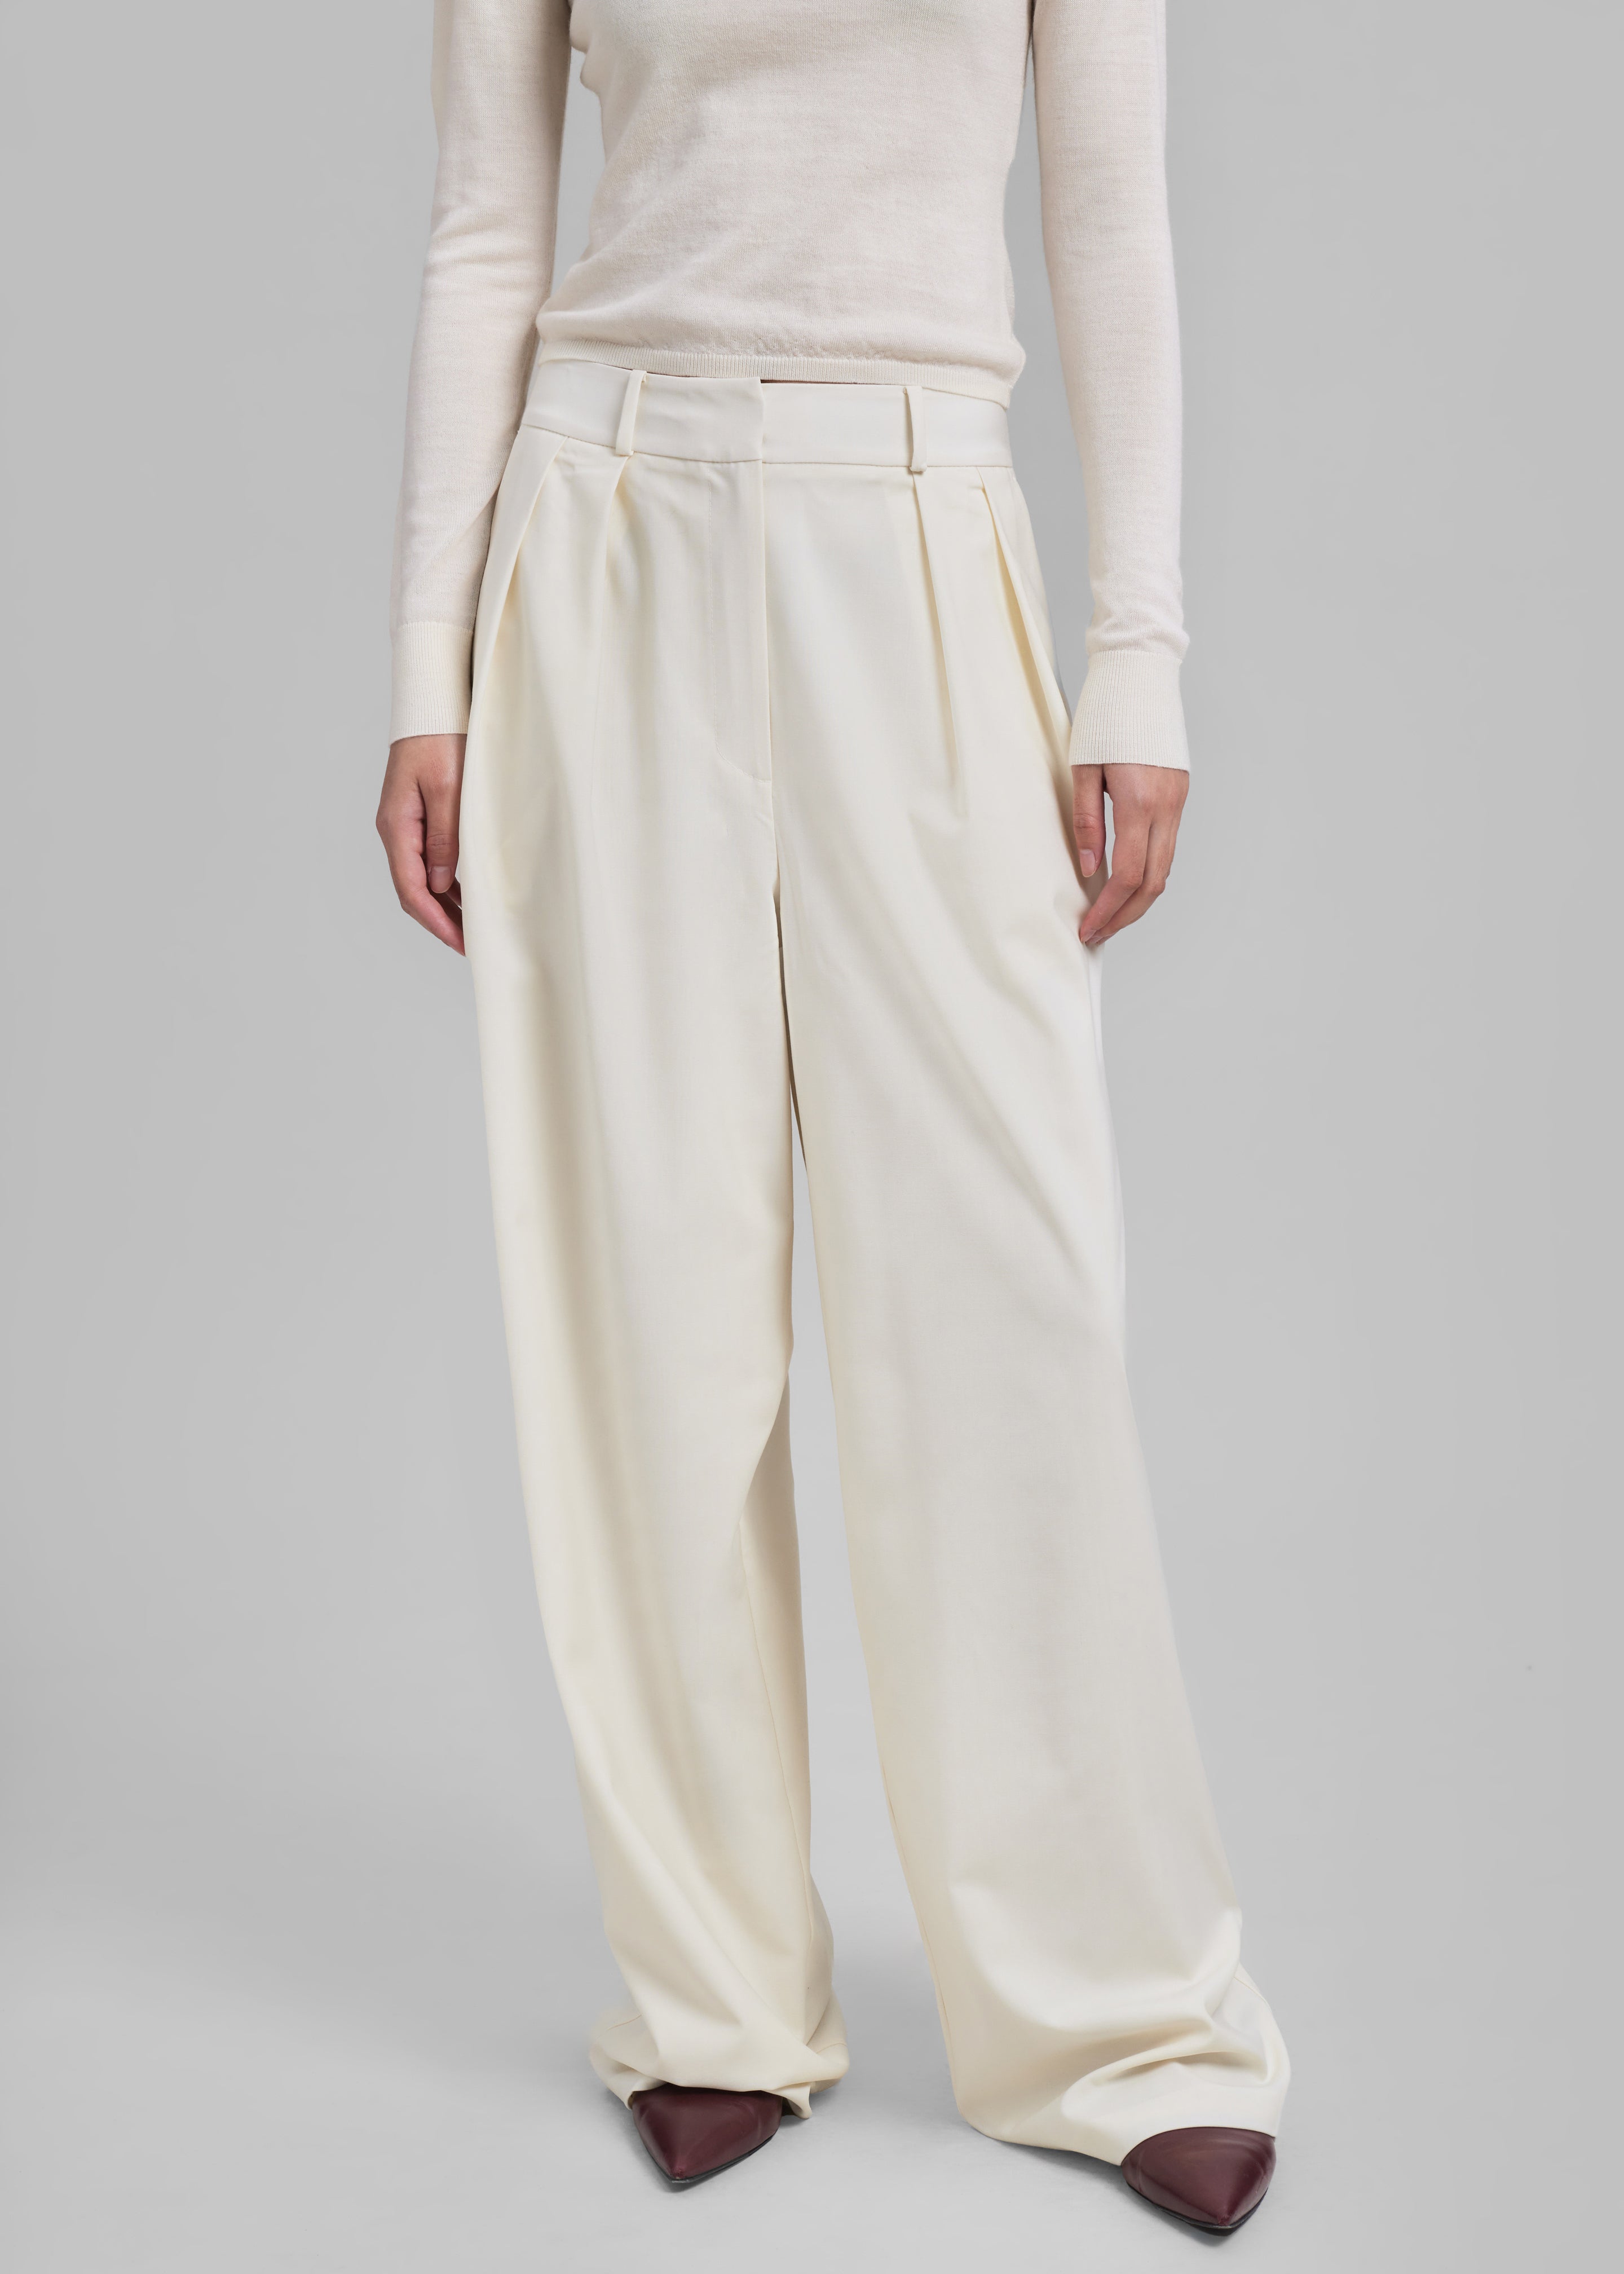 Ripley Pleated Trousers - Ivory - 5